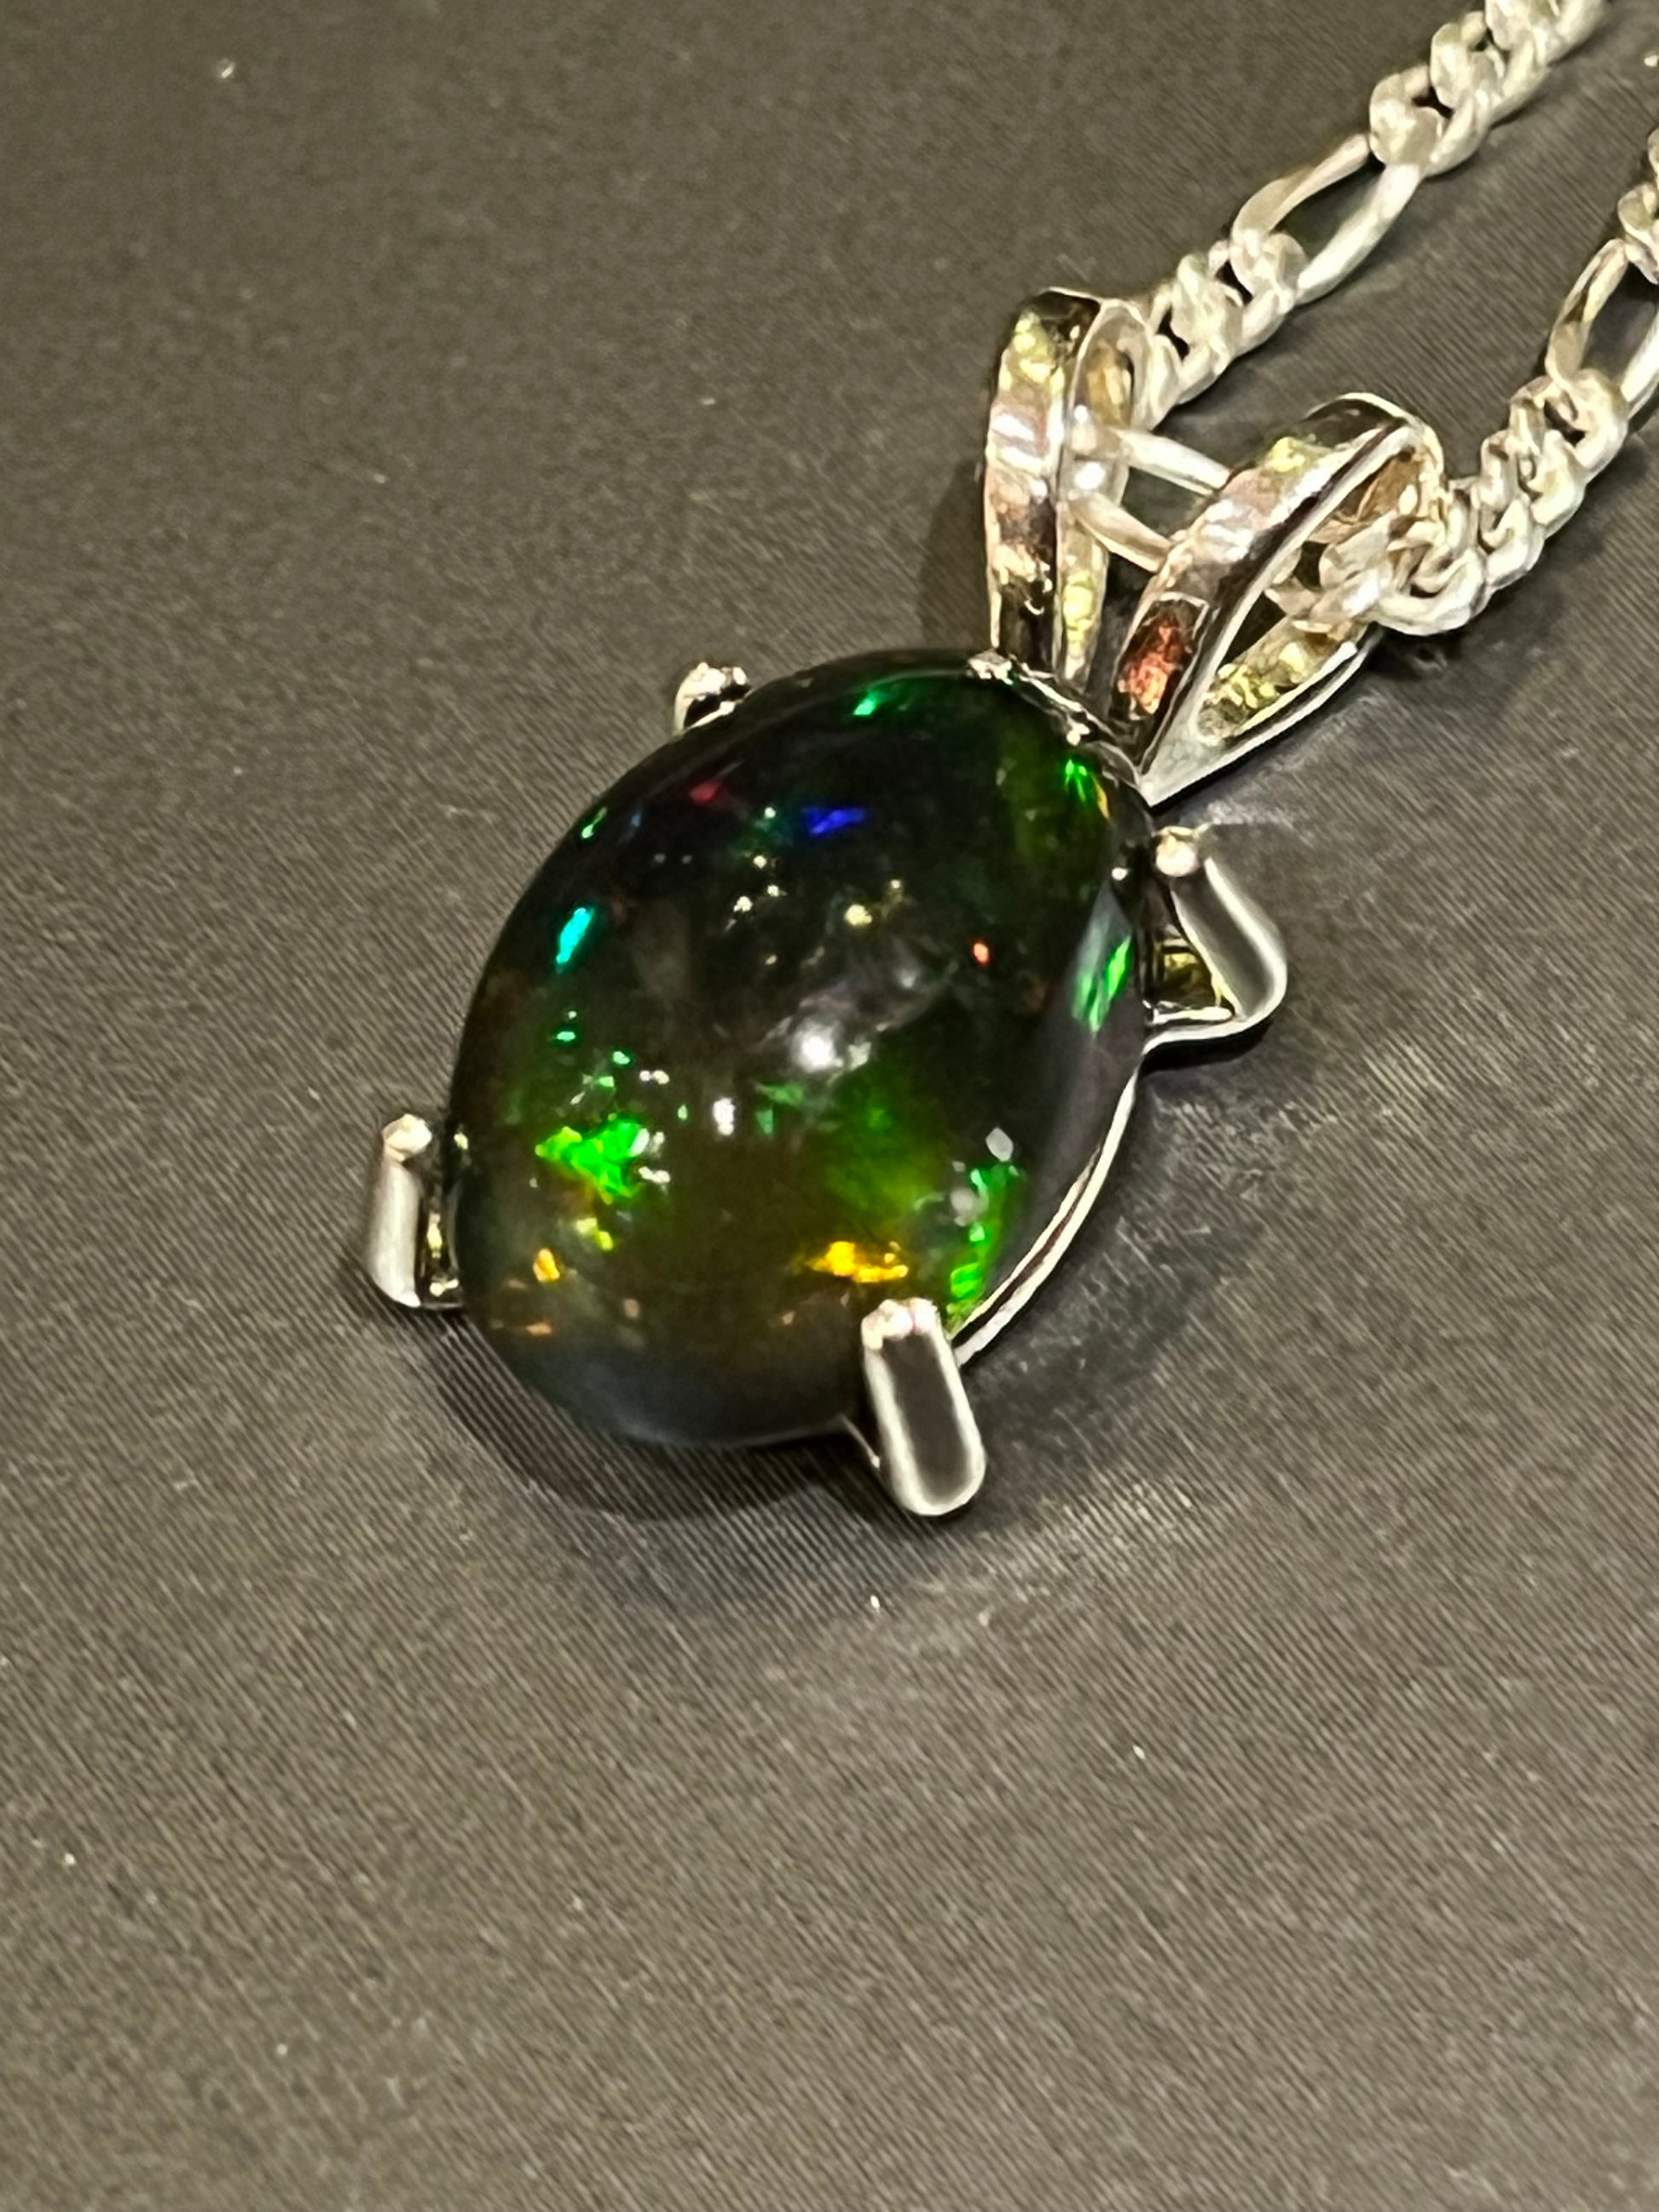 Brilliant 5.65 carat Australian Black Opal pendant in sterling. Certified Made in Alaska and Silver Hand jewelry.